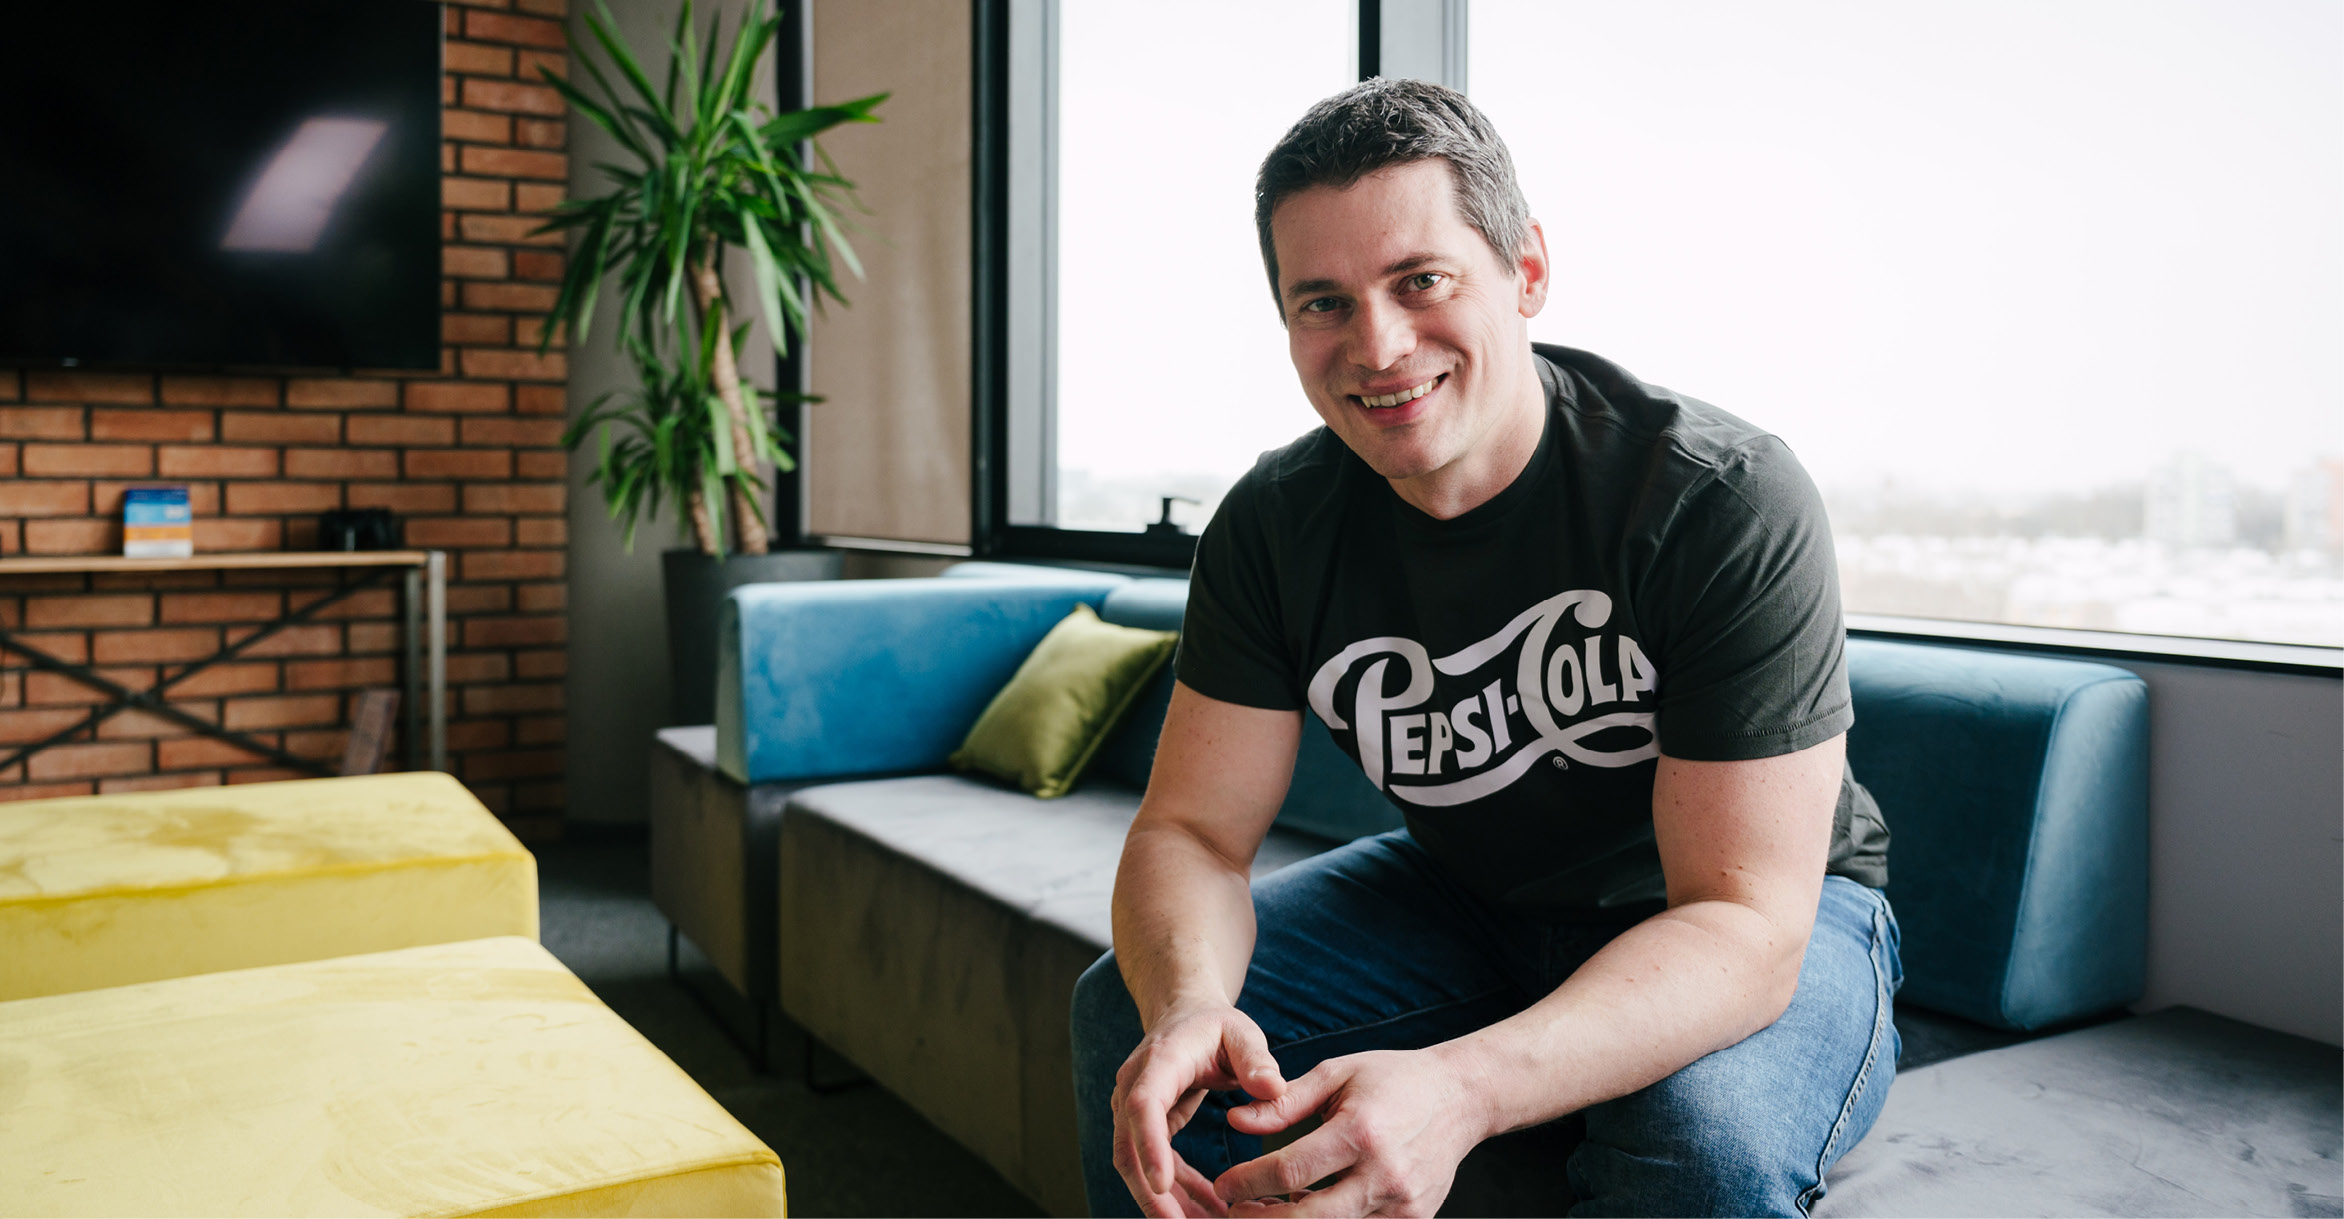 Filip Sielka sits on a couch inside his brightly lit workspace with colorful blue, green and yellow furnishings. He has short brown hair and is wearing jeans with a PepsiCo t-shirt. He smiles as he casually leans forward resting his elbows on his knees. | GBS